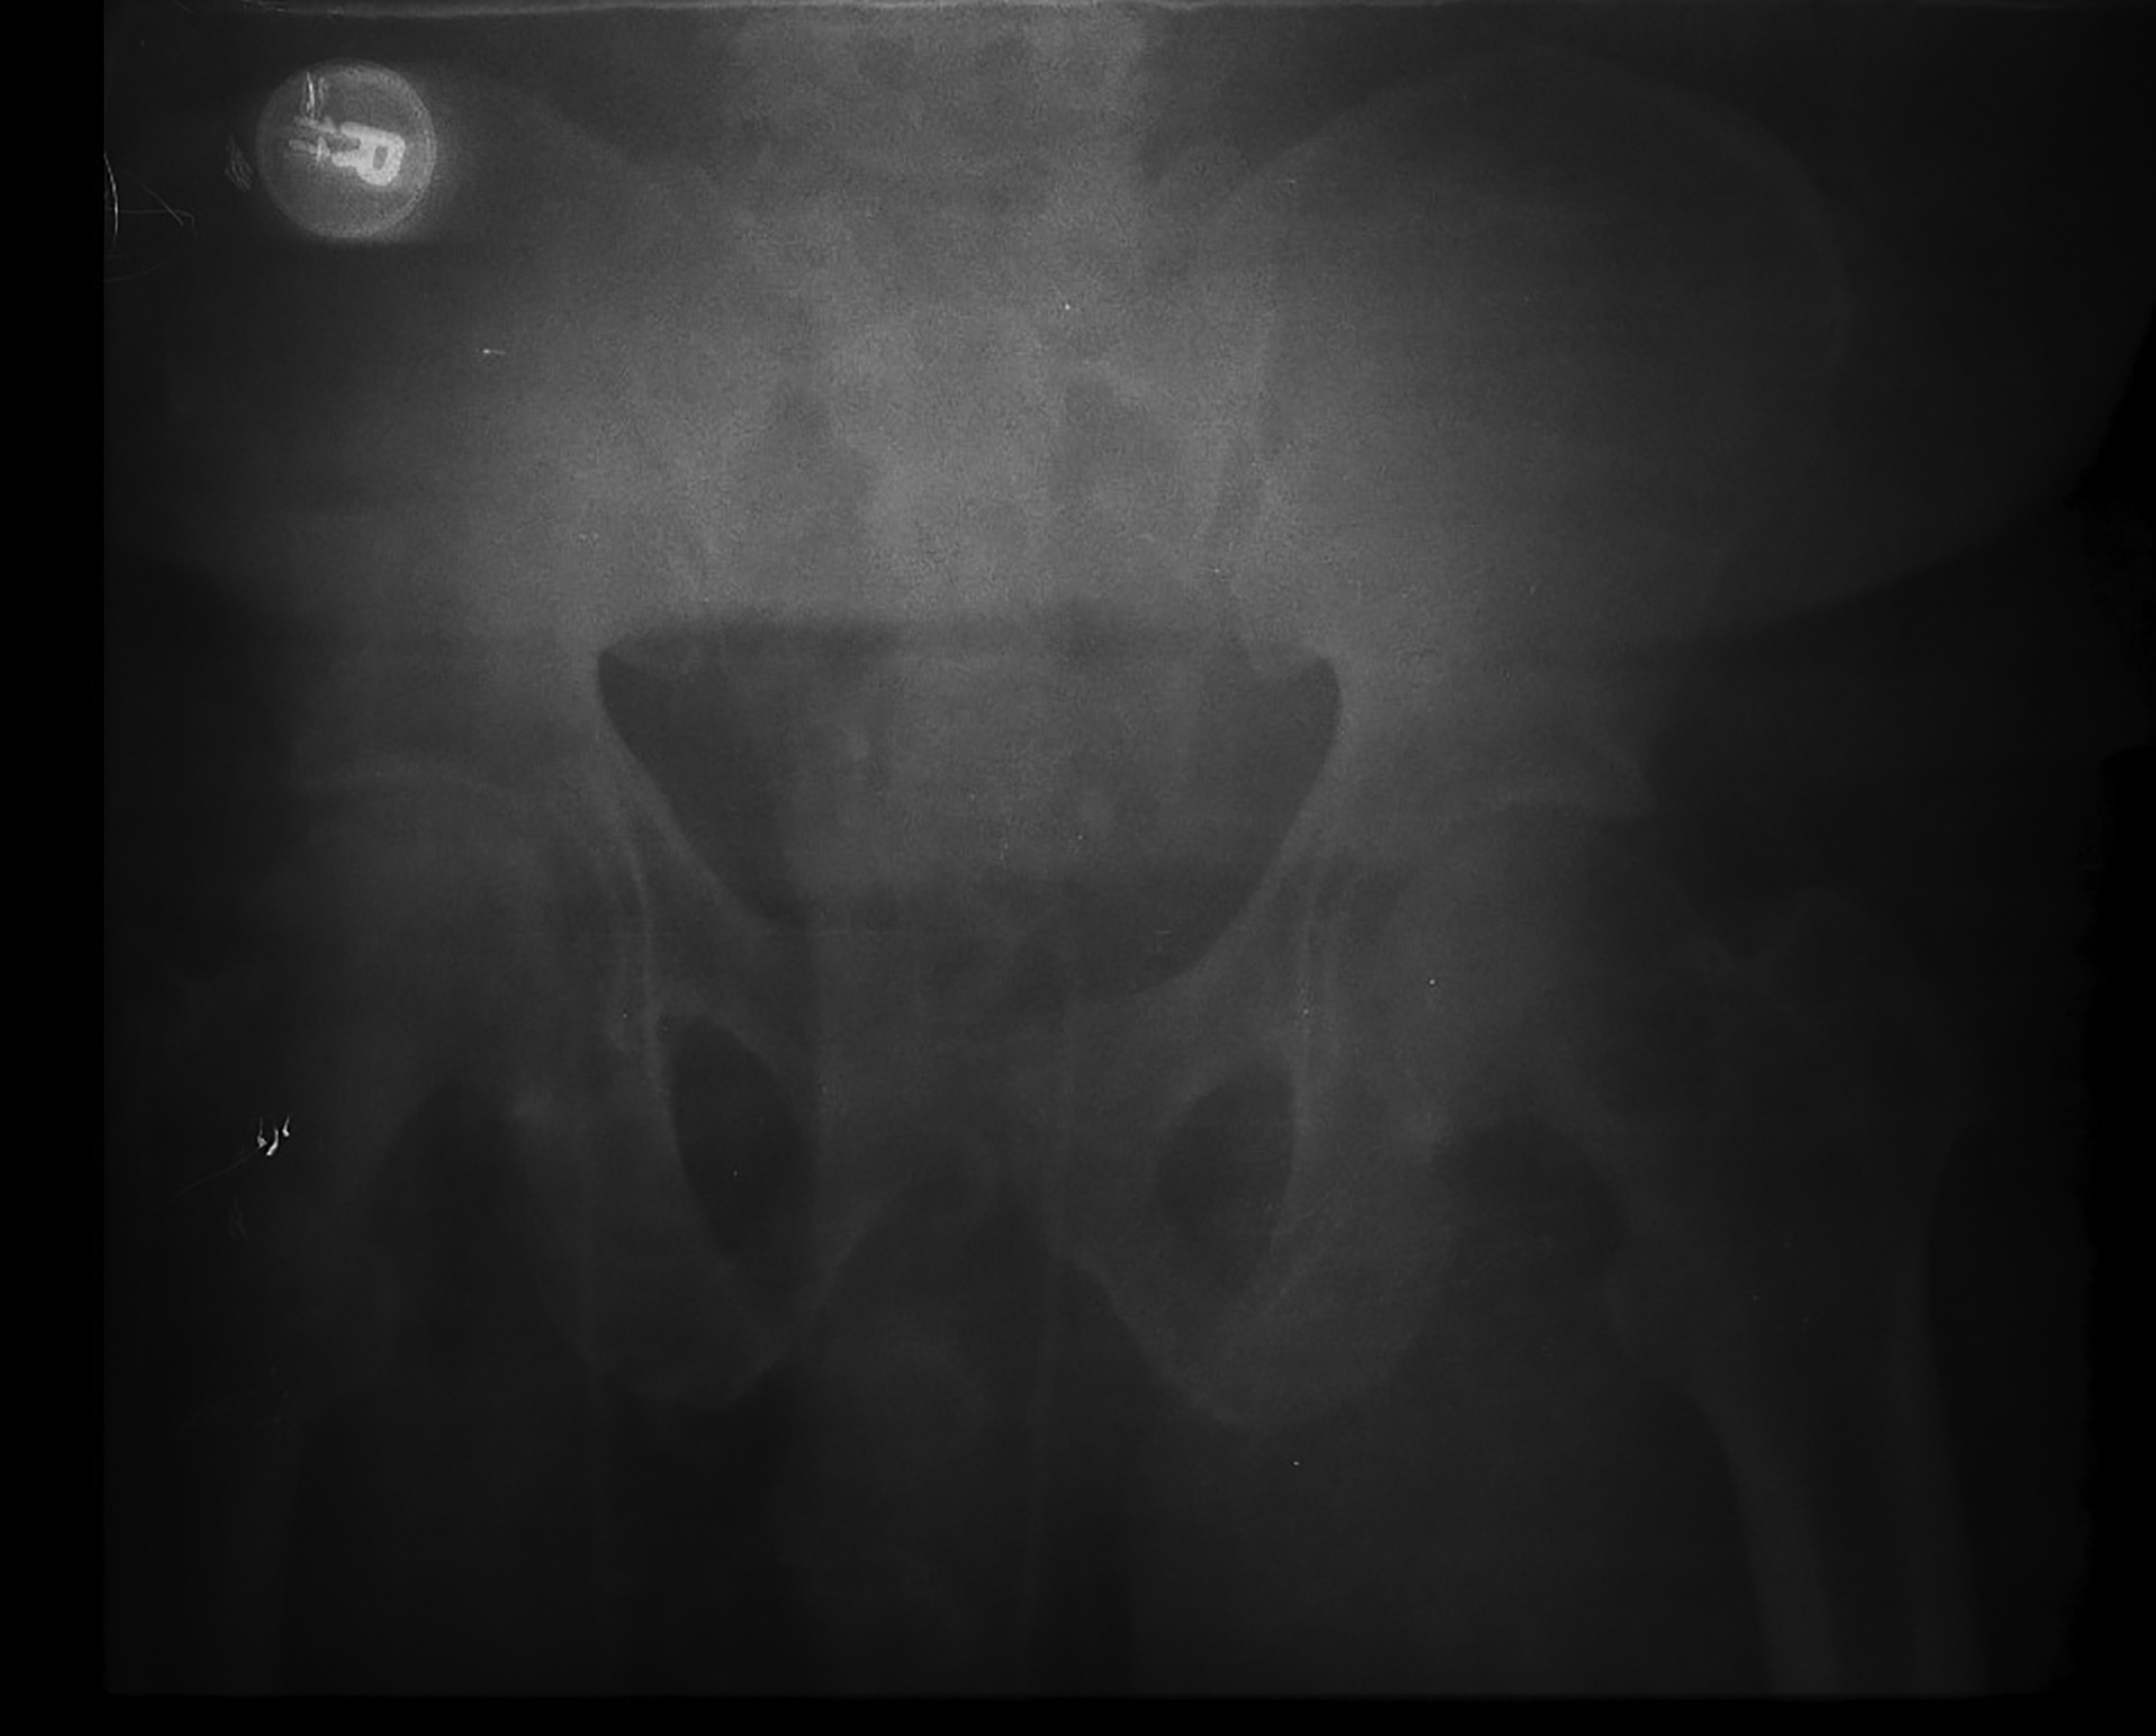 Pelvic fracture after placement of pelvic binder